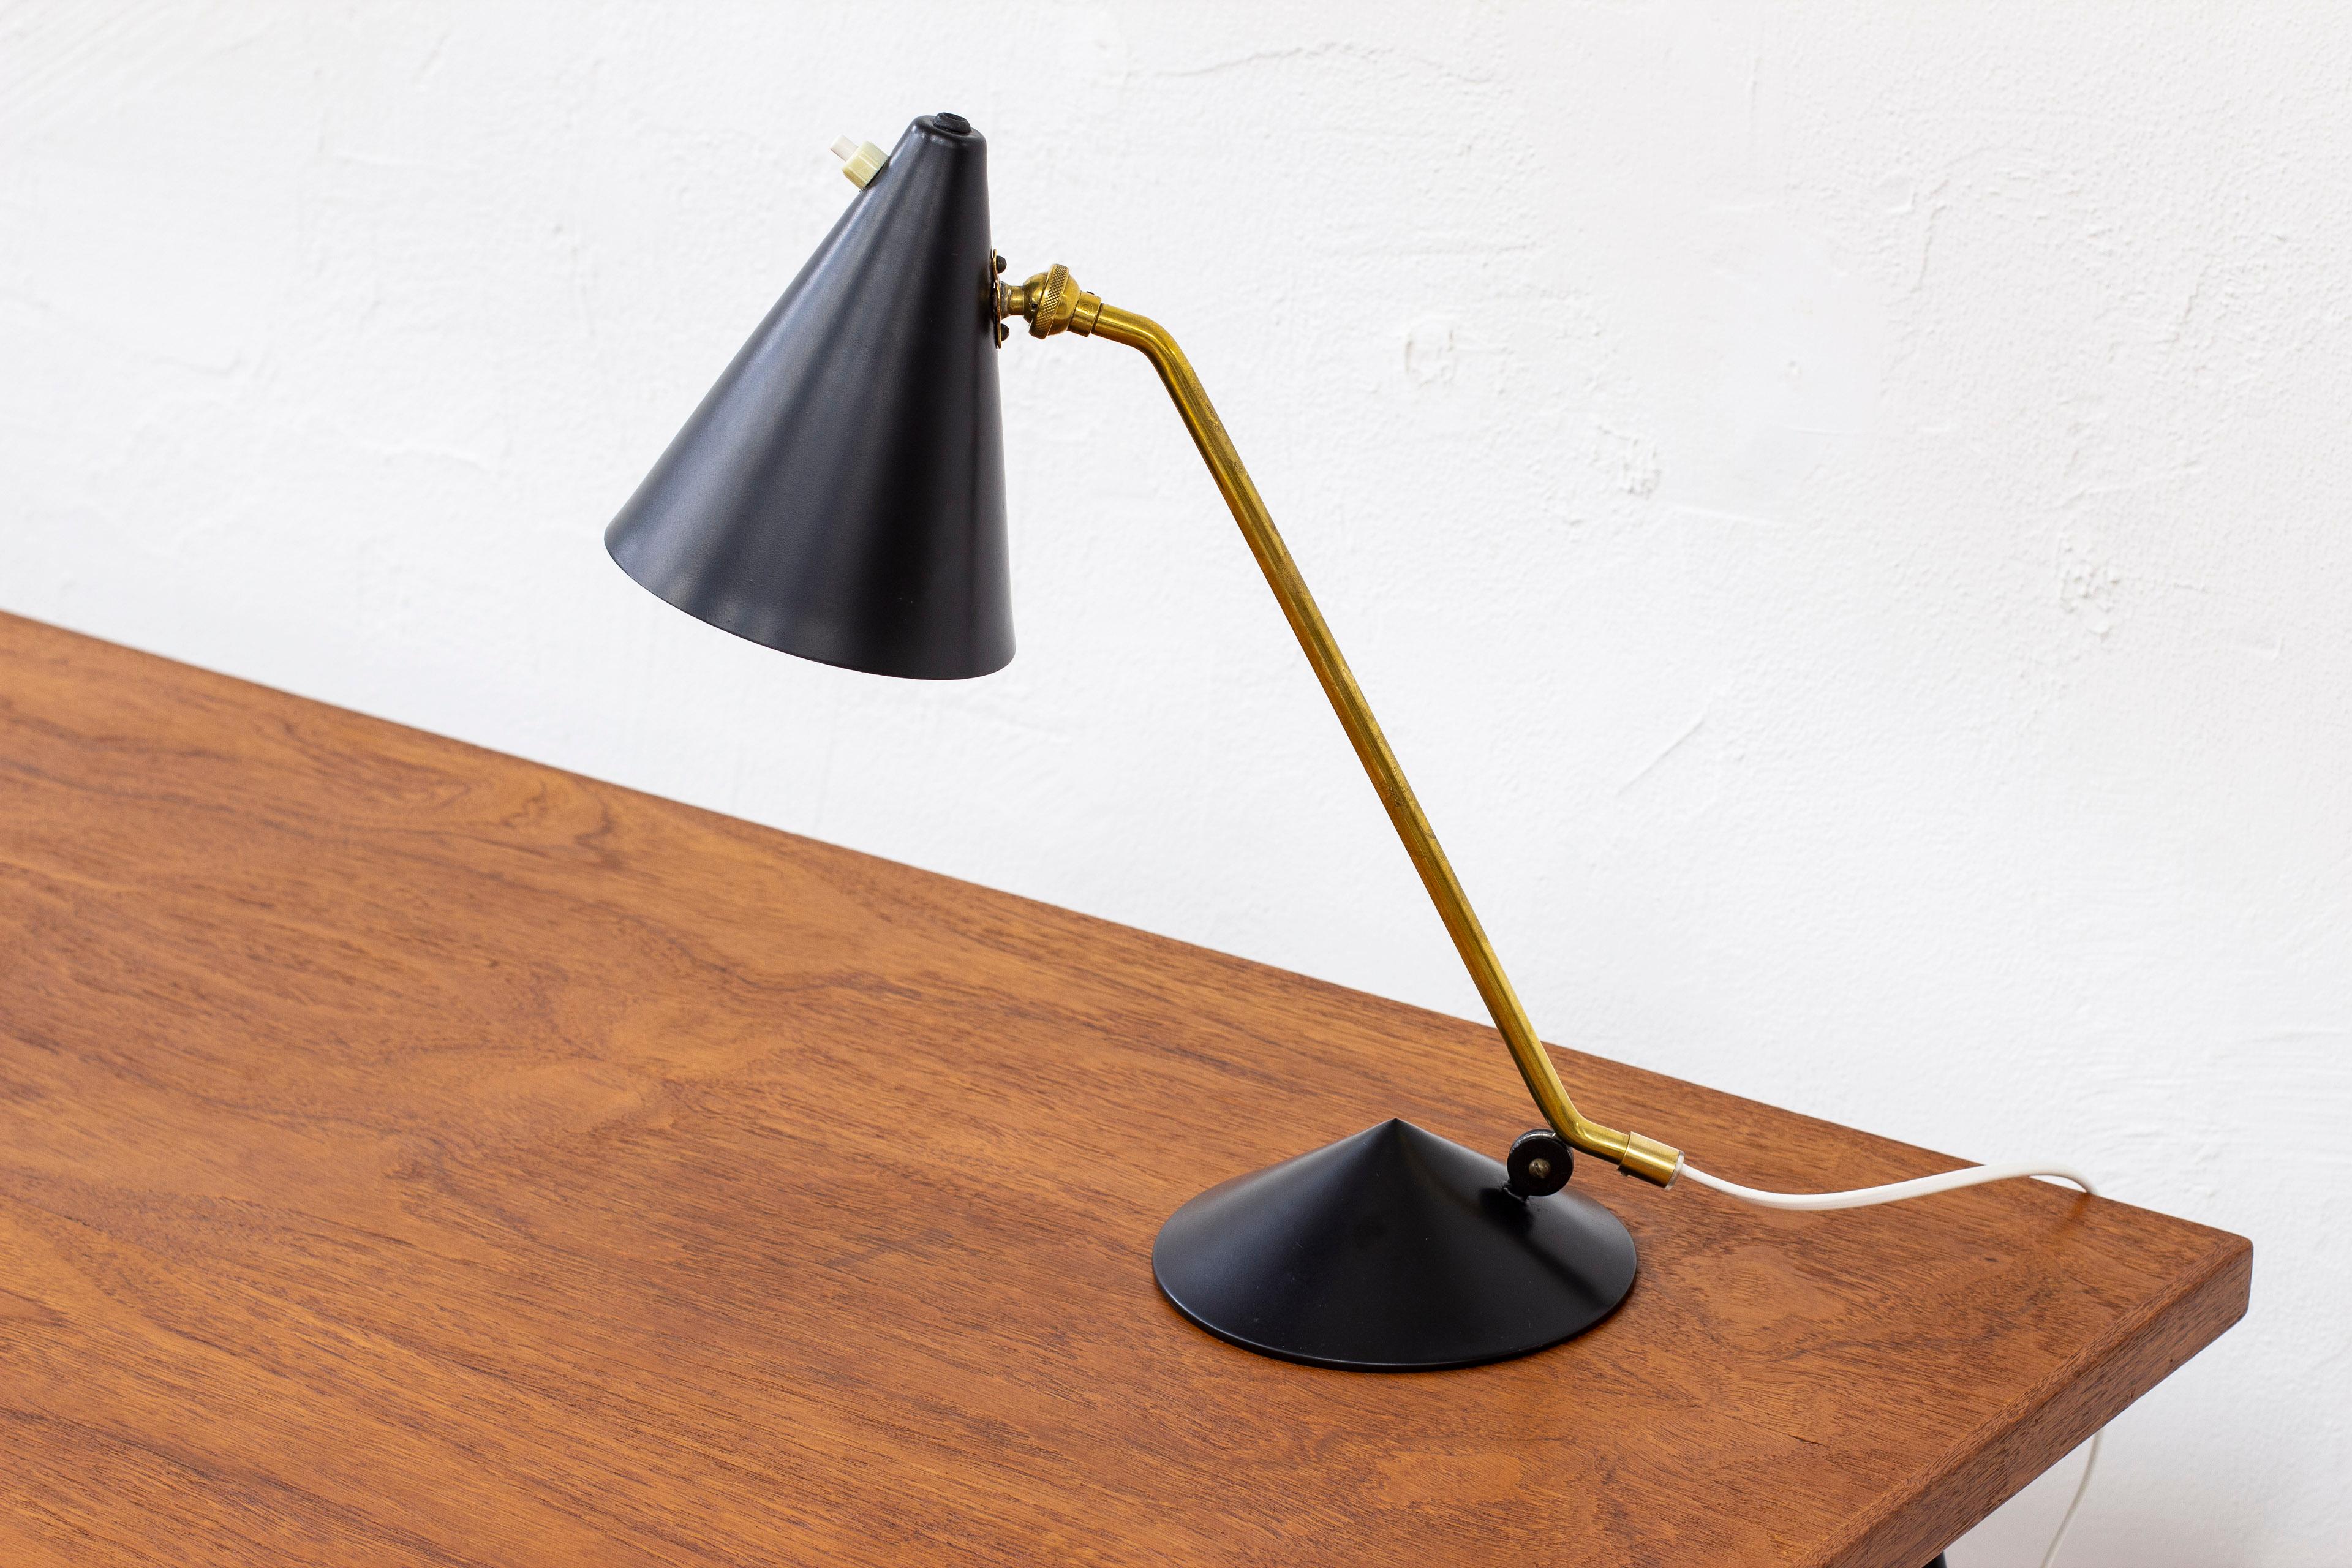 Table lamp attributed to Svend Aage Holm Sørensen. Produced in Denmark during the 1950s, likely produced by Holm Sørensen & Co. Made from brass and black painted metal. Two adjustable shades. Light switch on the shade in working order. Good vintage